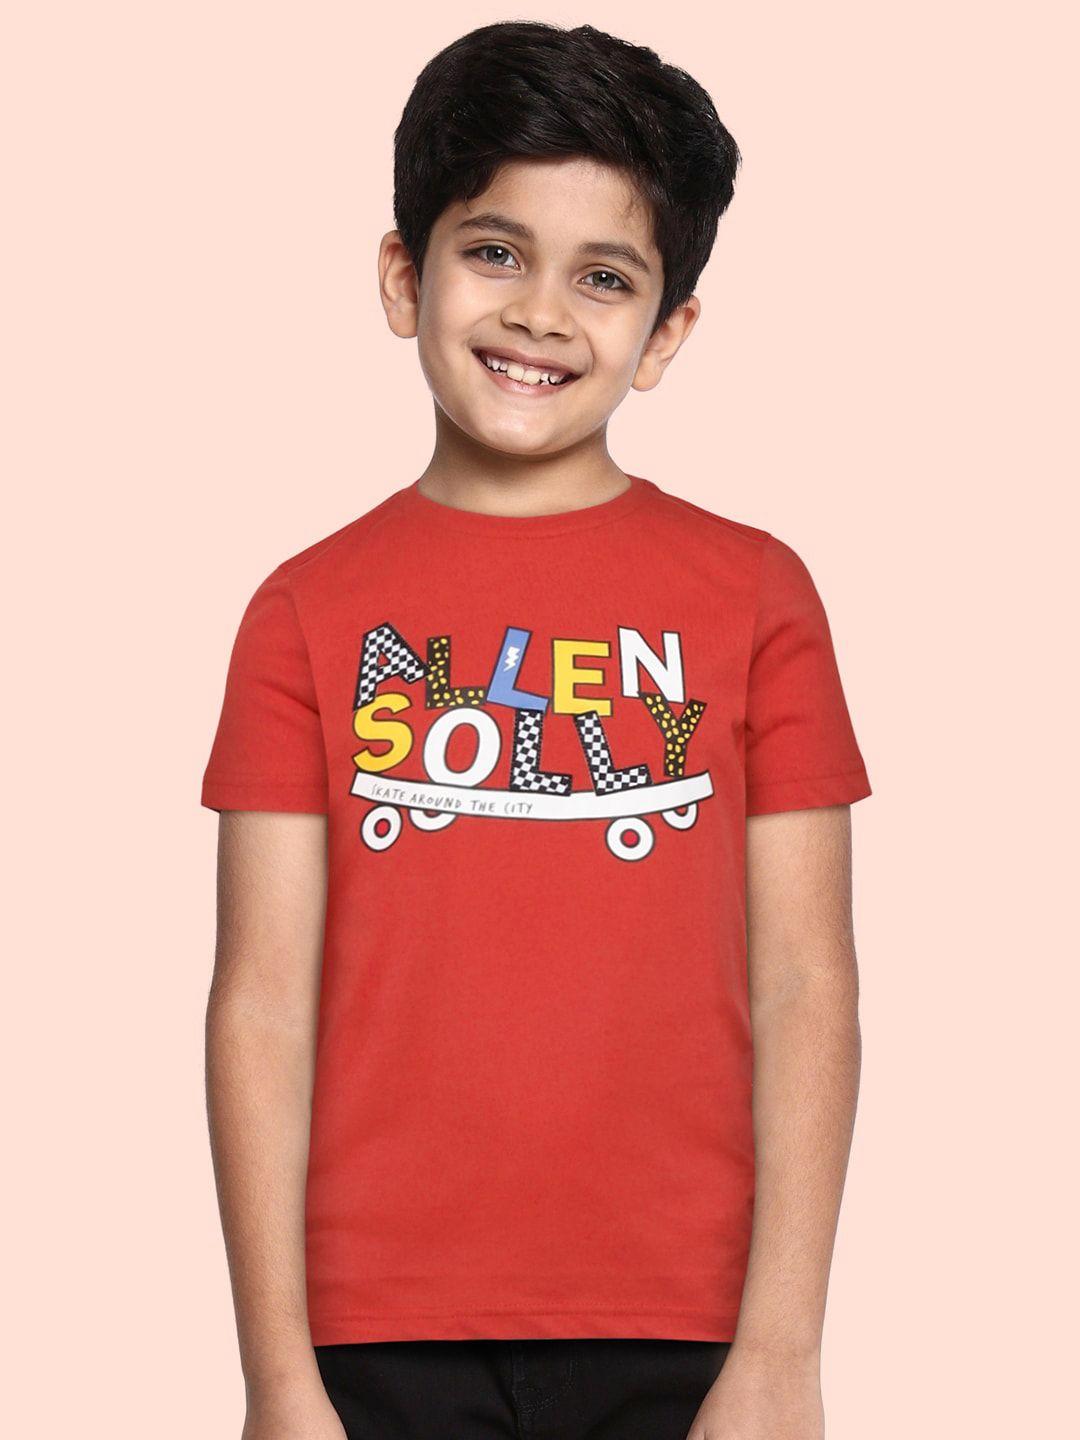 allen solly junior boys red & white brand logo printed pure cotton t-shirt